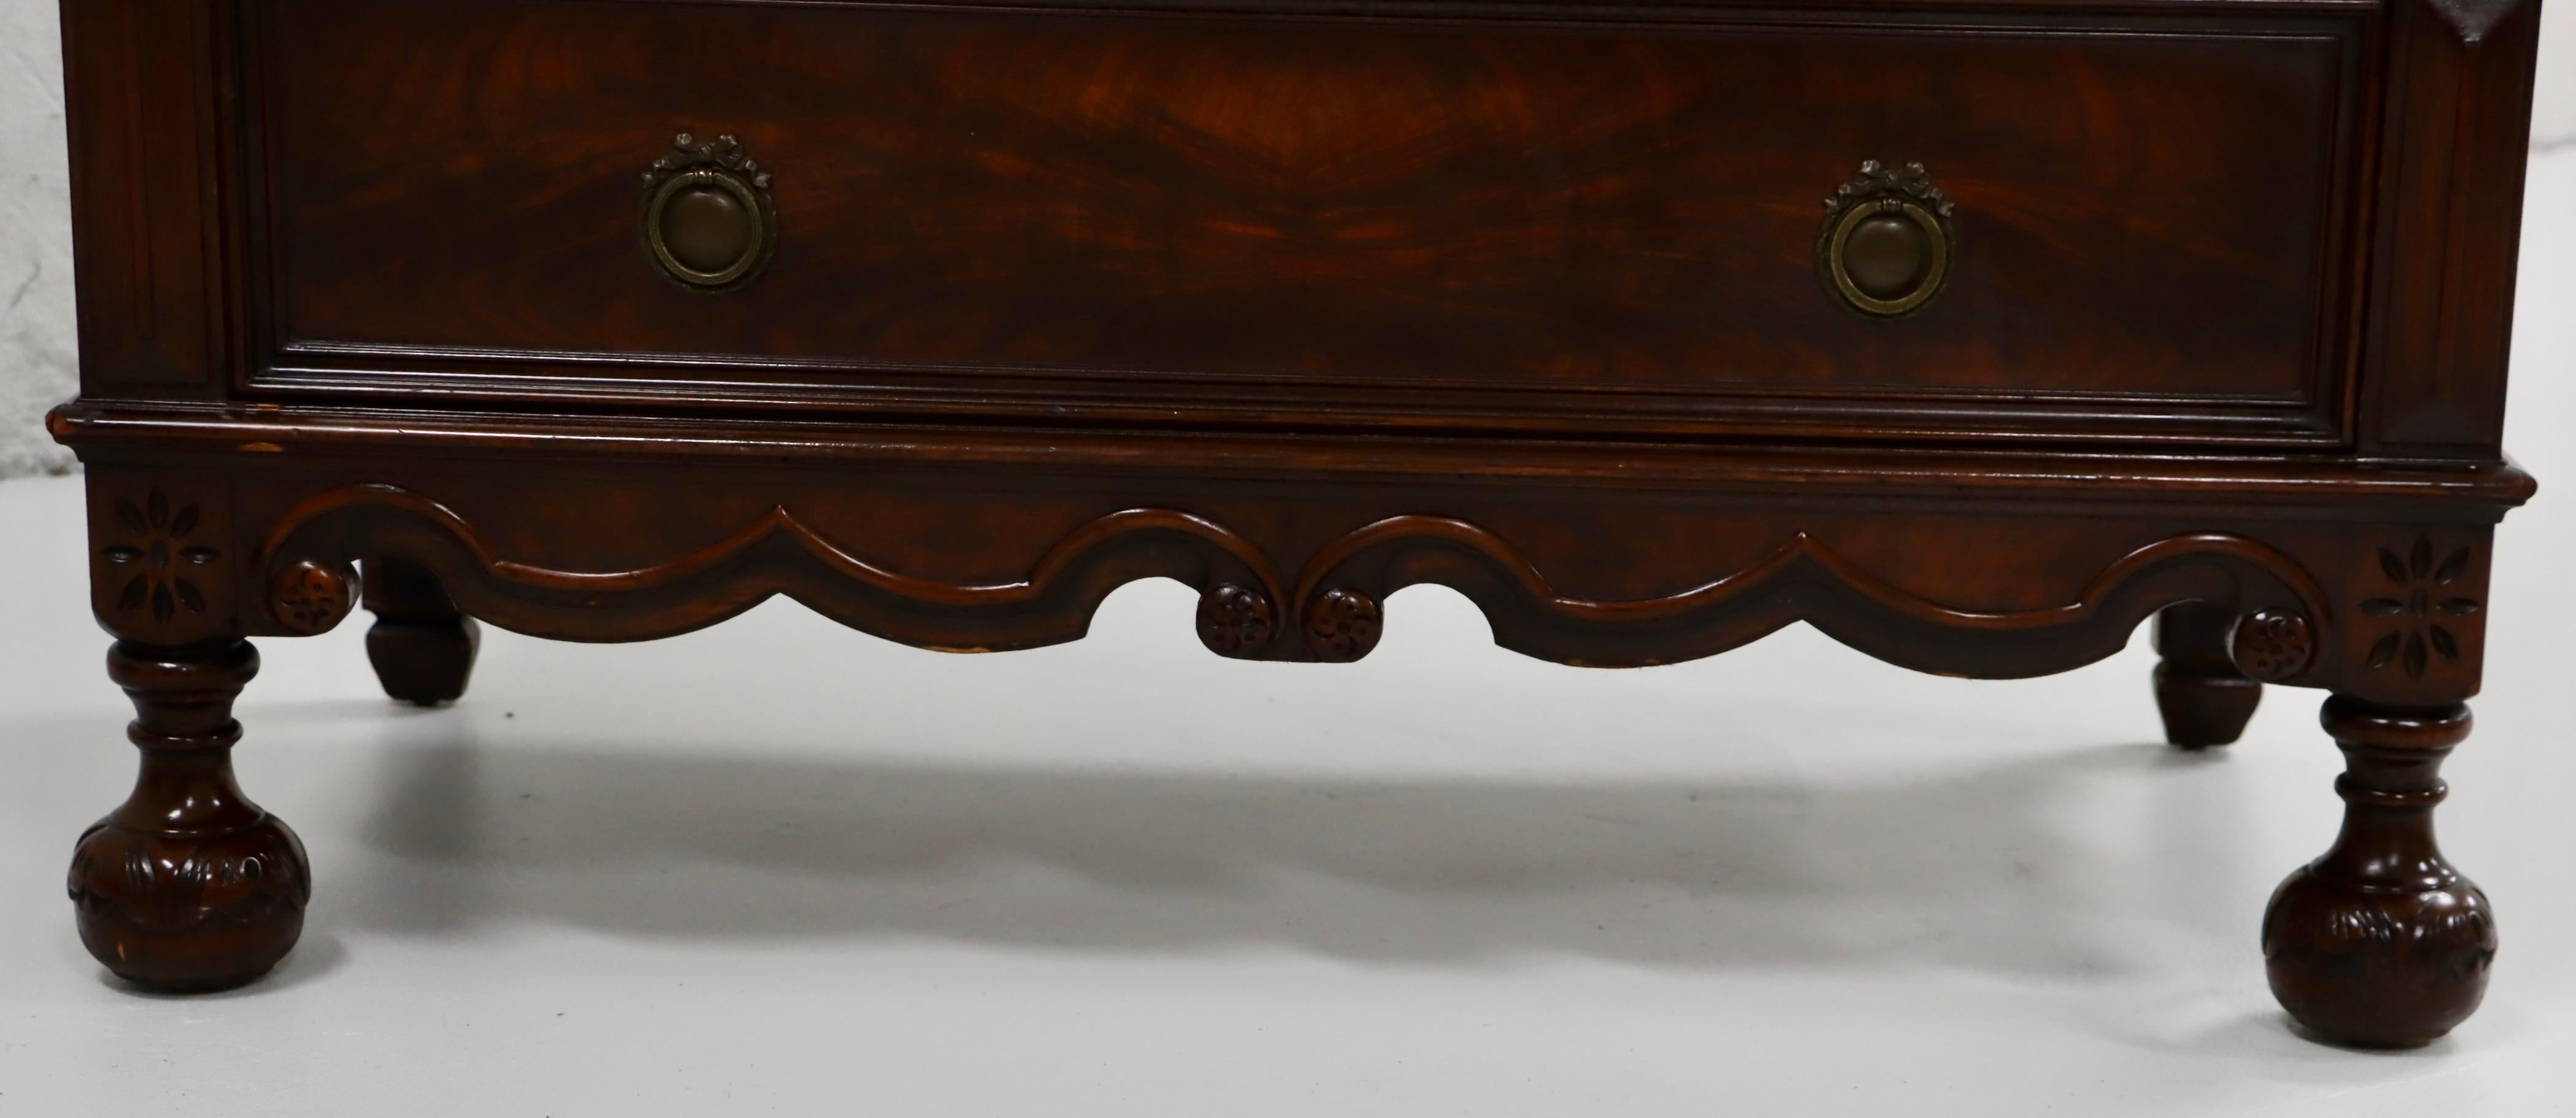 American Classical 1940's Tall Dresser By Berkey & Gay Furniture With Amazing Carved Wood Detail